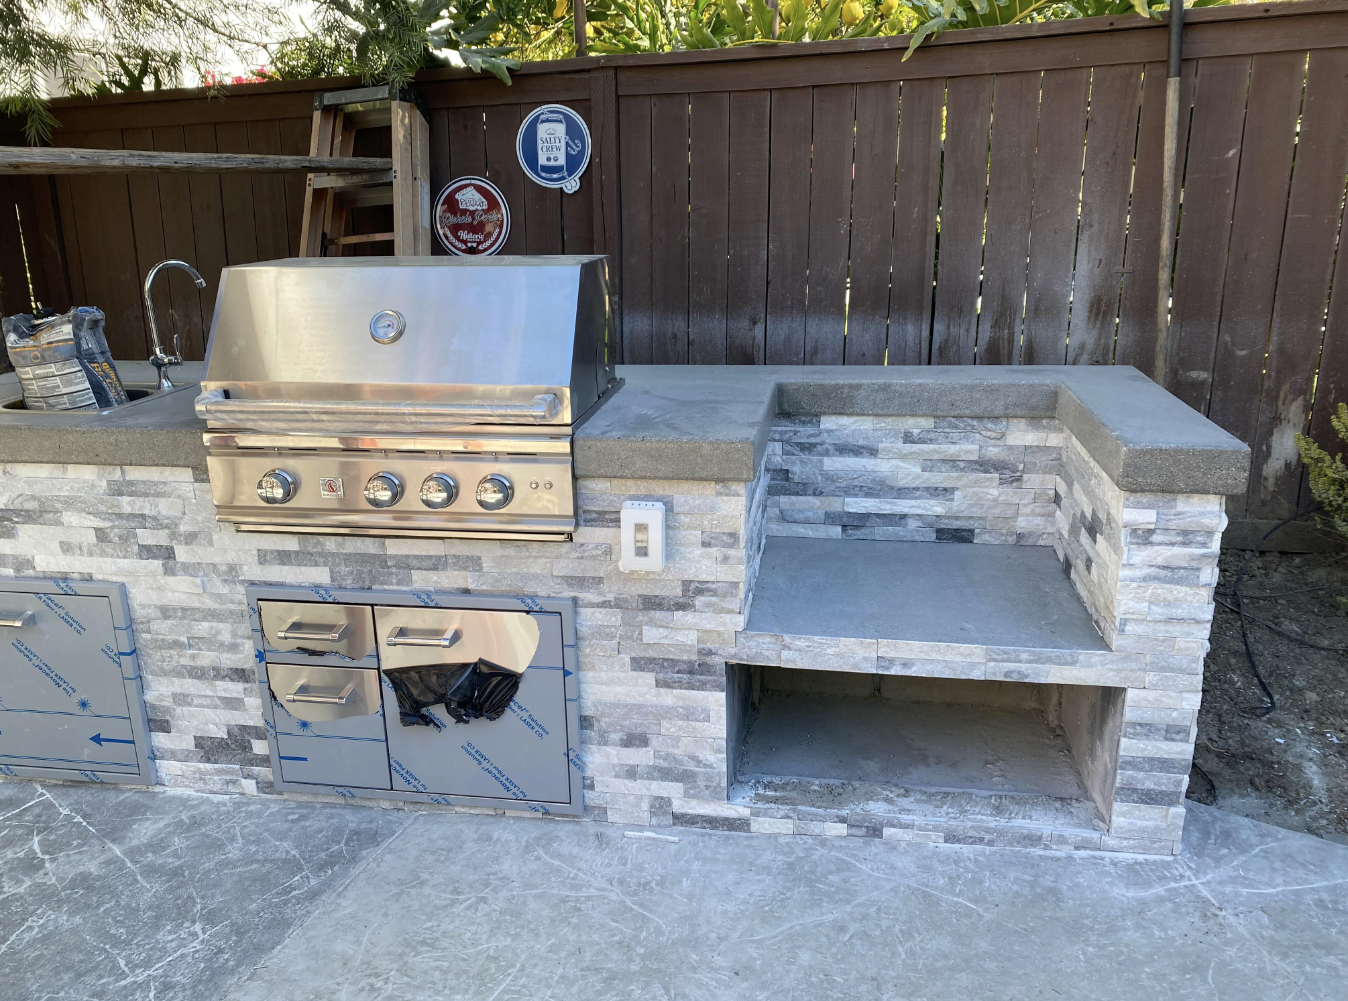 Backyard under construction with unfinished built-in BBQ island and concrete base